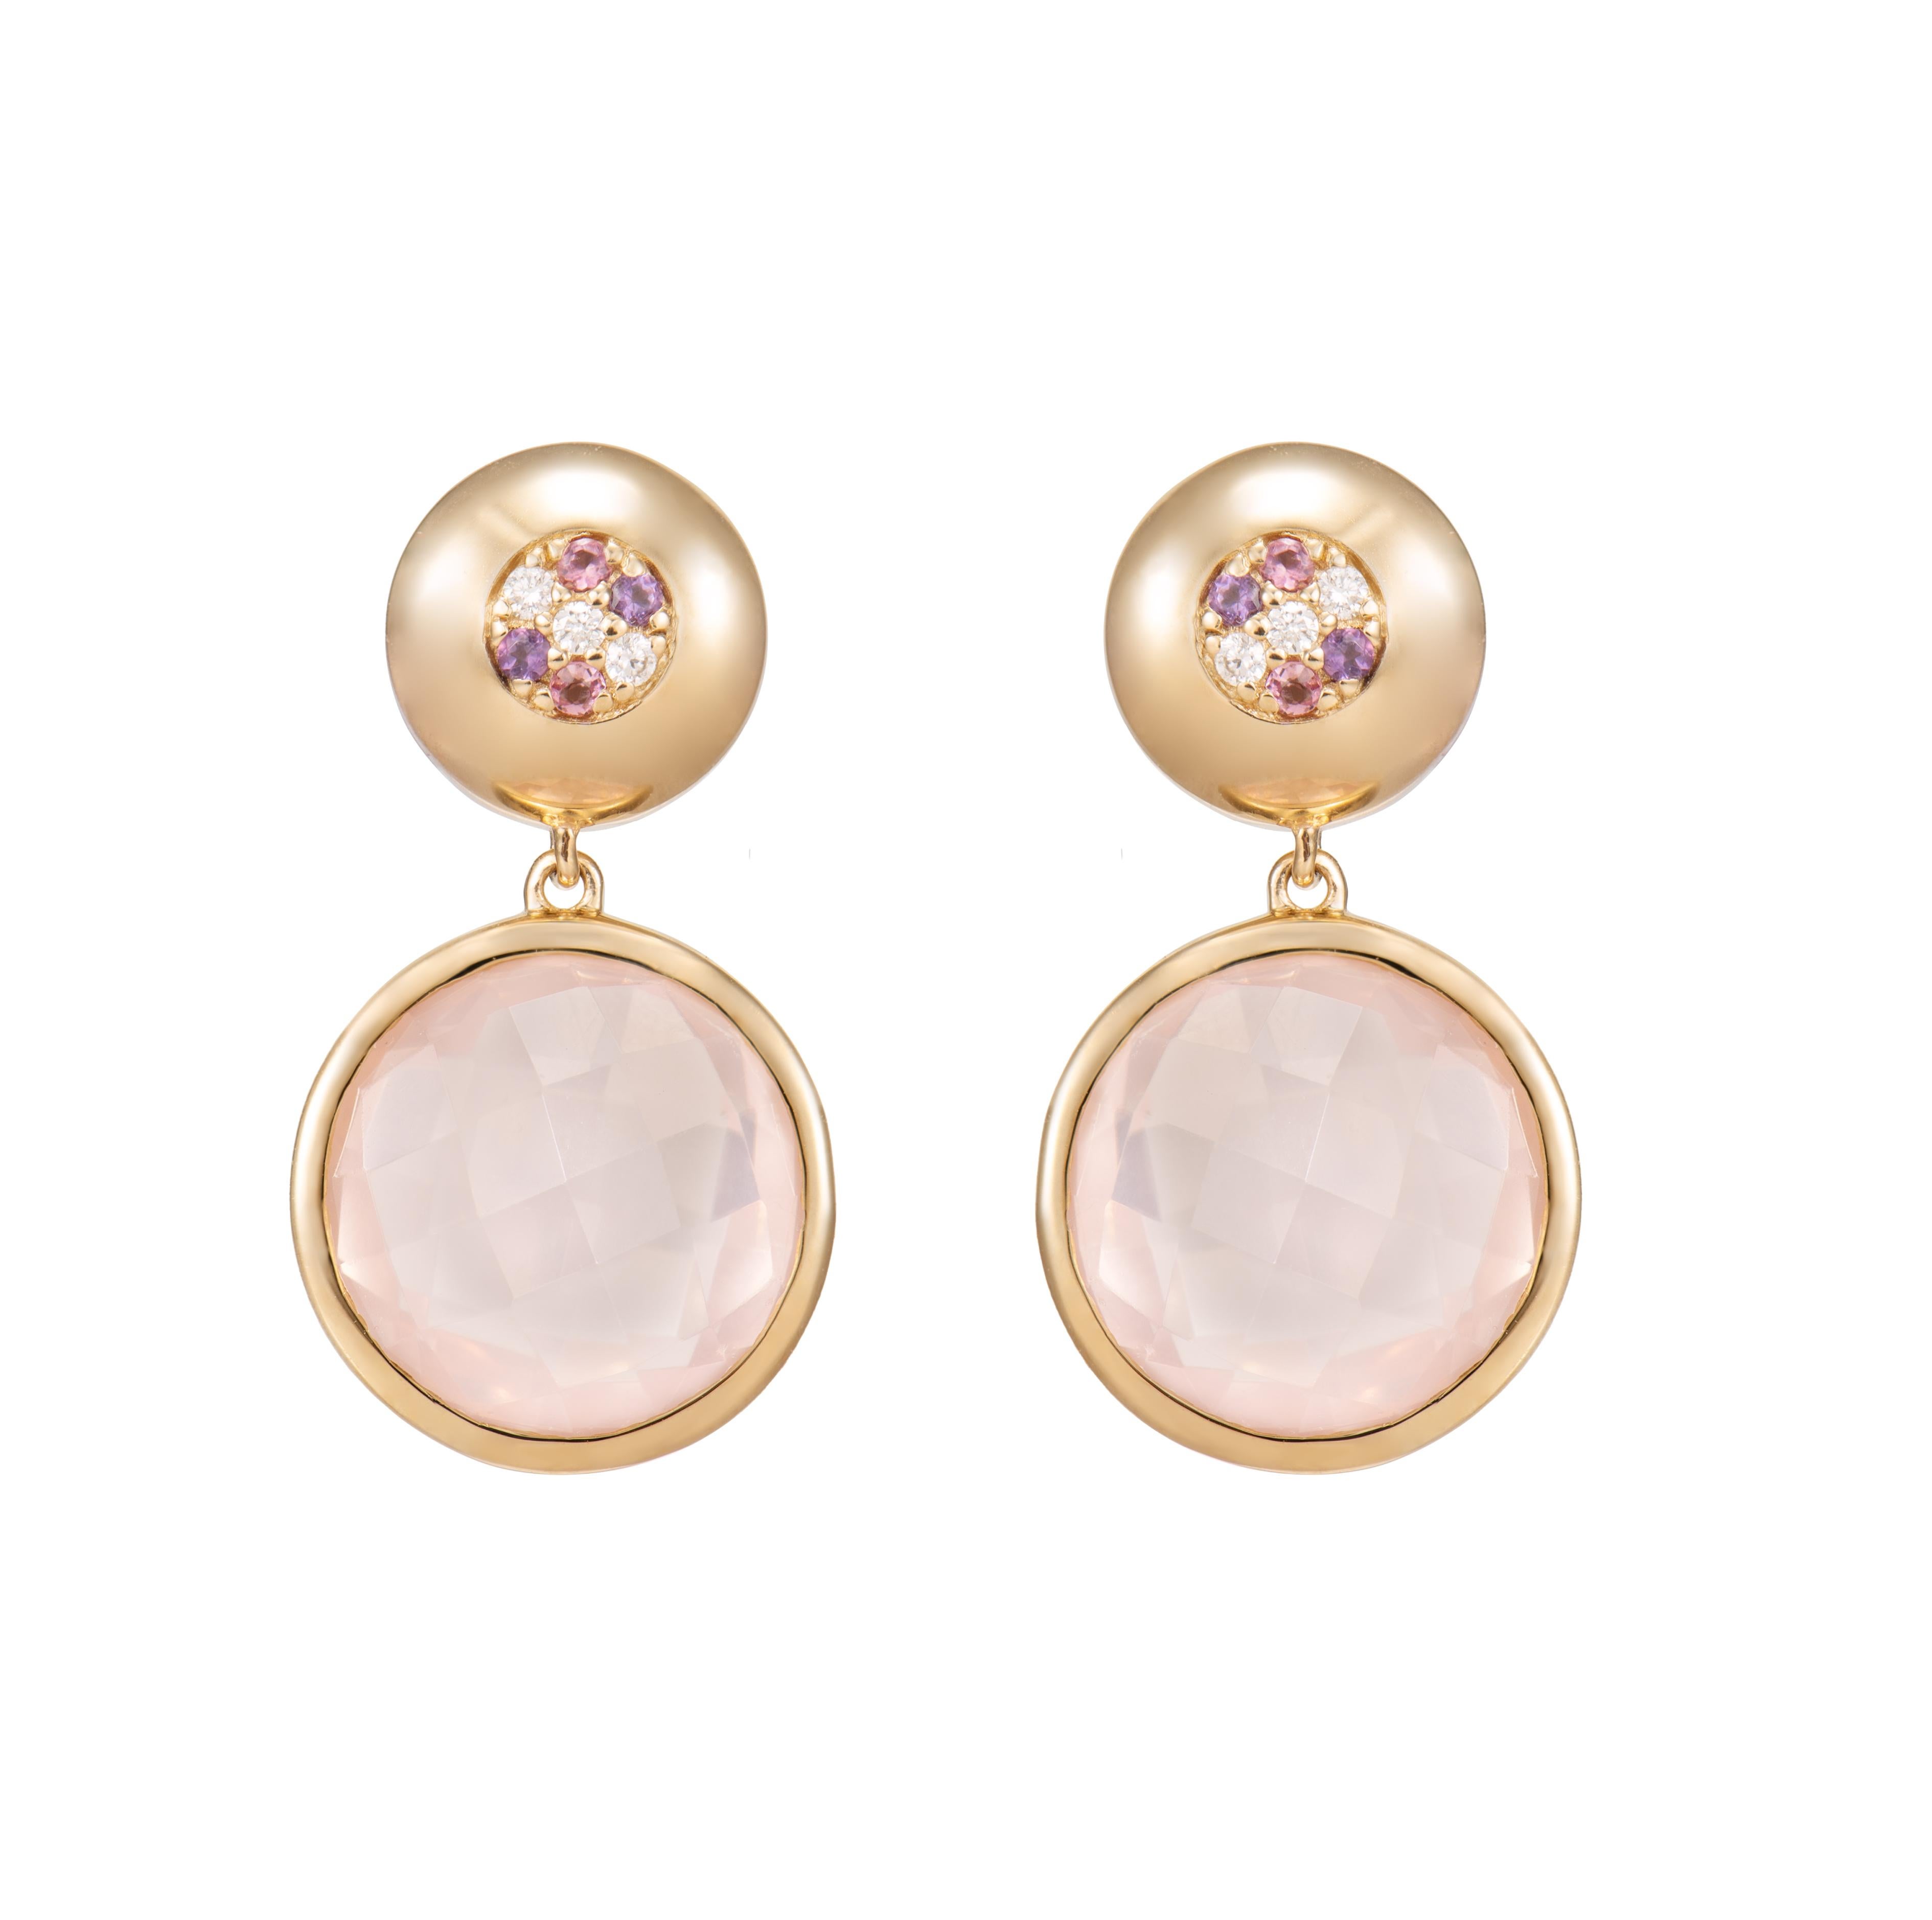 Contemporary 19.54 Carat Rose Quartz Drop Earring in 18KYG with Multi Gemstone and Diamond. For Sale